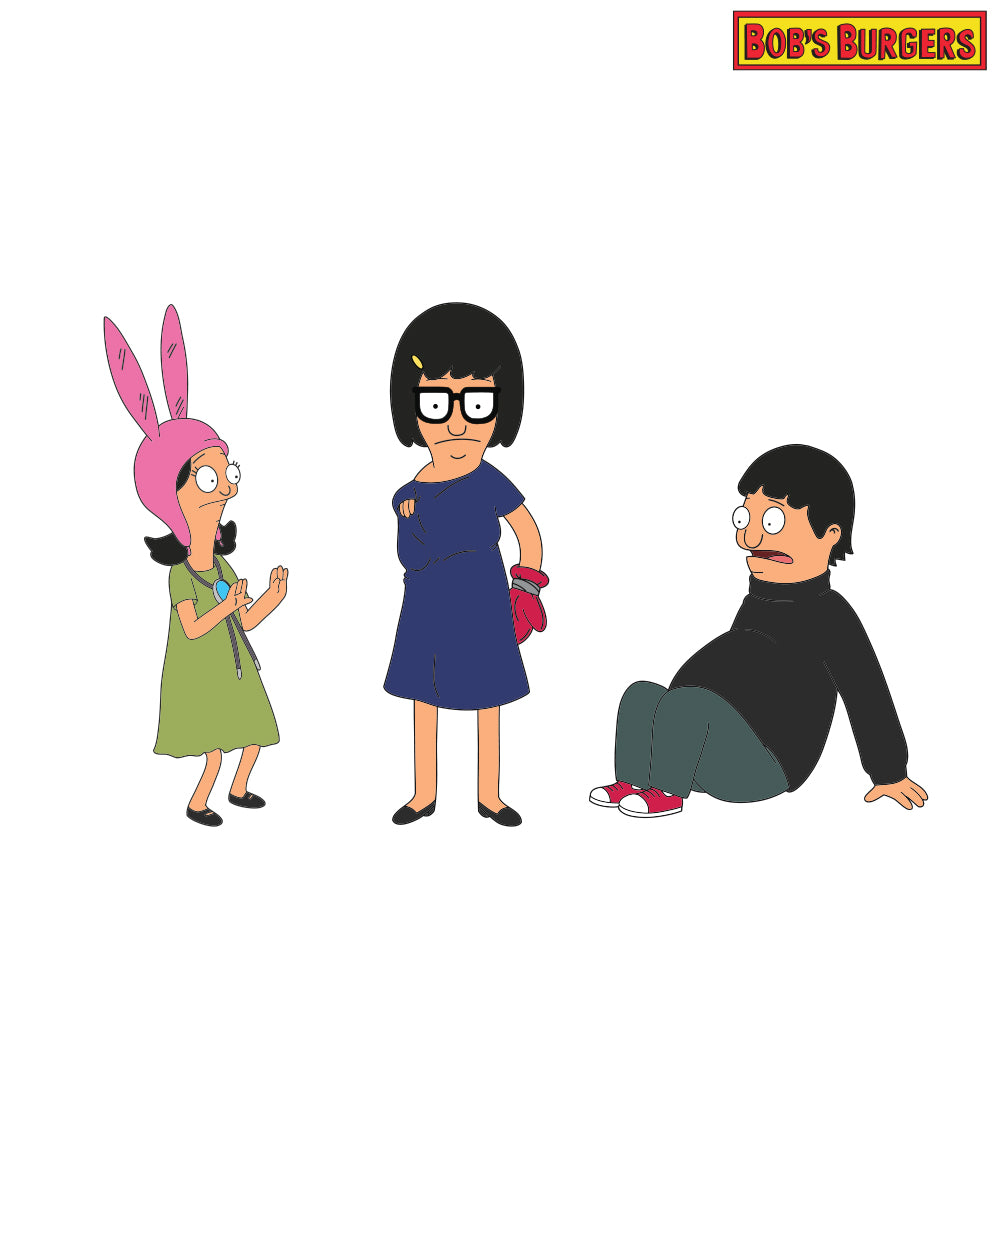 2021 Bob's Burgers Worms Kids 3 pack (limited edition of 400) (pre-order, ships 8/15-8/30)